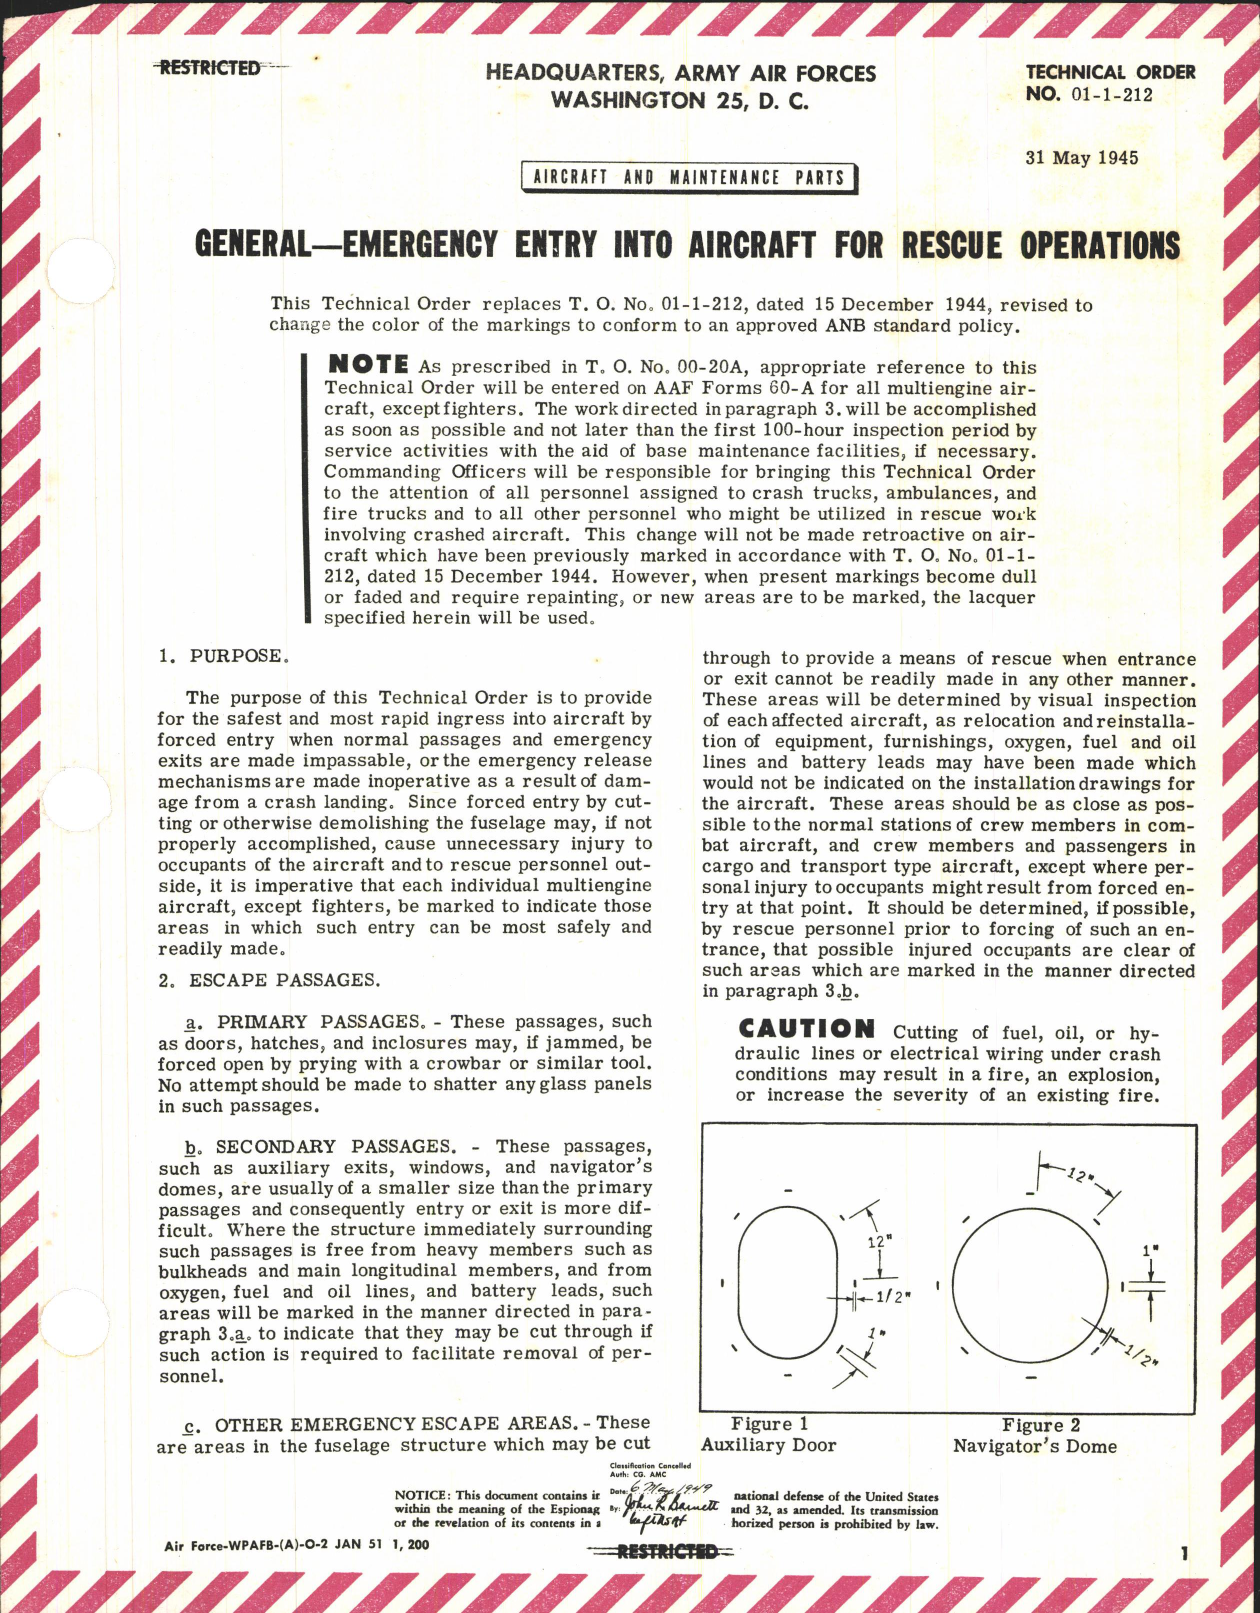 Sample page 1 from AirCorps Library document: Aircraft and Maintenance Parts; Emergency Entry Into Aircraft For Rescue Operations